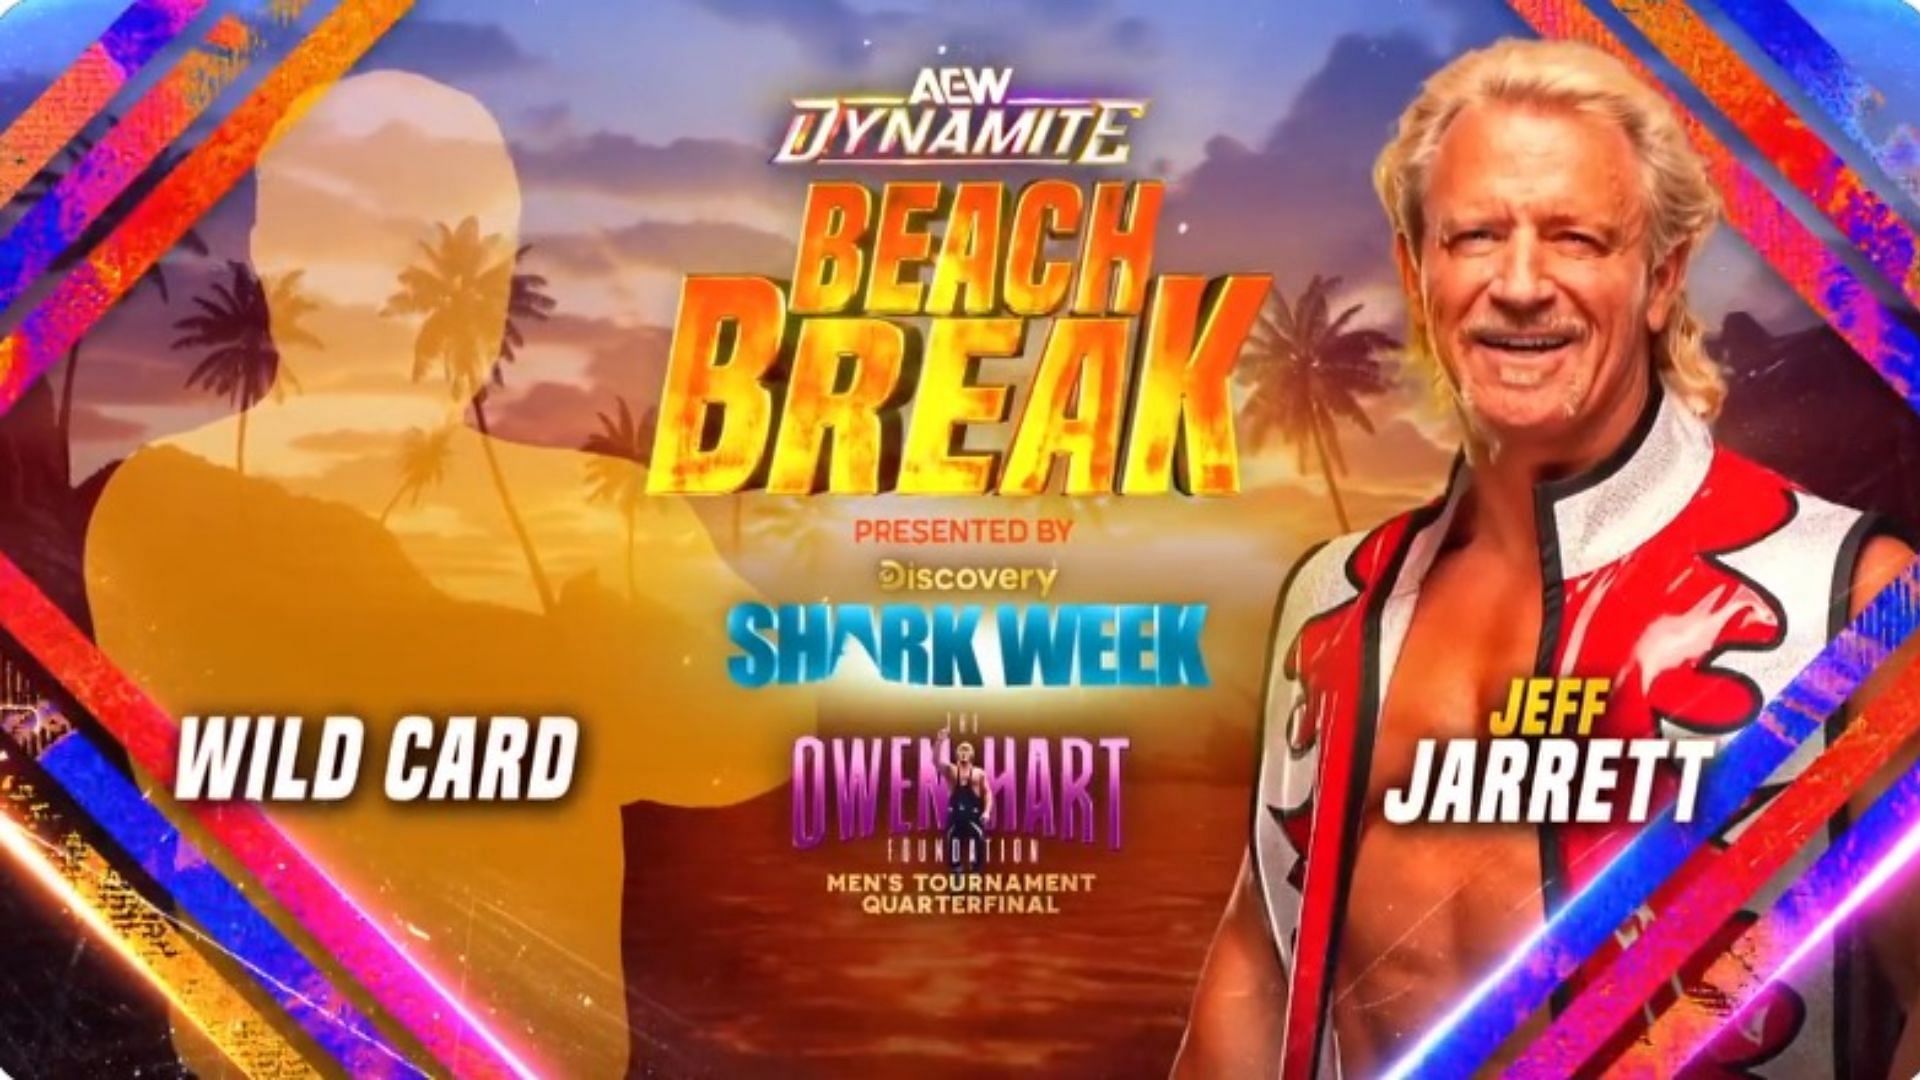 There are some interesting names who could step up as the Wild Card against Jeff Jarrett on Dynamite.[Image credits: AEW Twitter/X account]